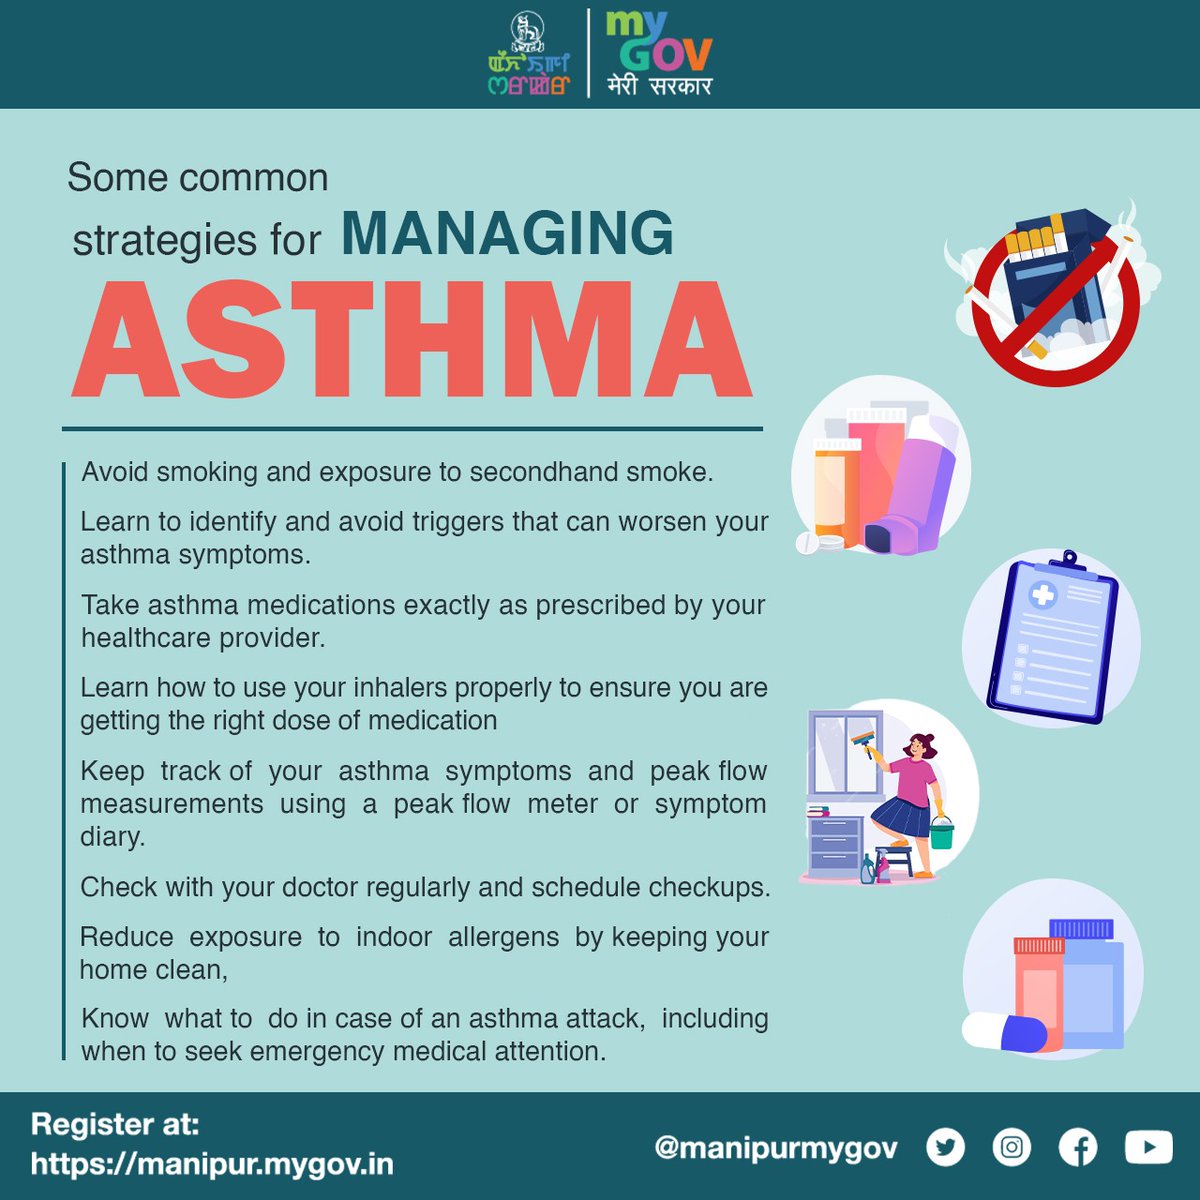 Stay on top of your asthma management with these key strategies! Empower yourself with these essential strategies for managing asthma effectively. From avoiding triggers to proper medication usage and regular checkups, take control of your asthma journey.